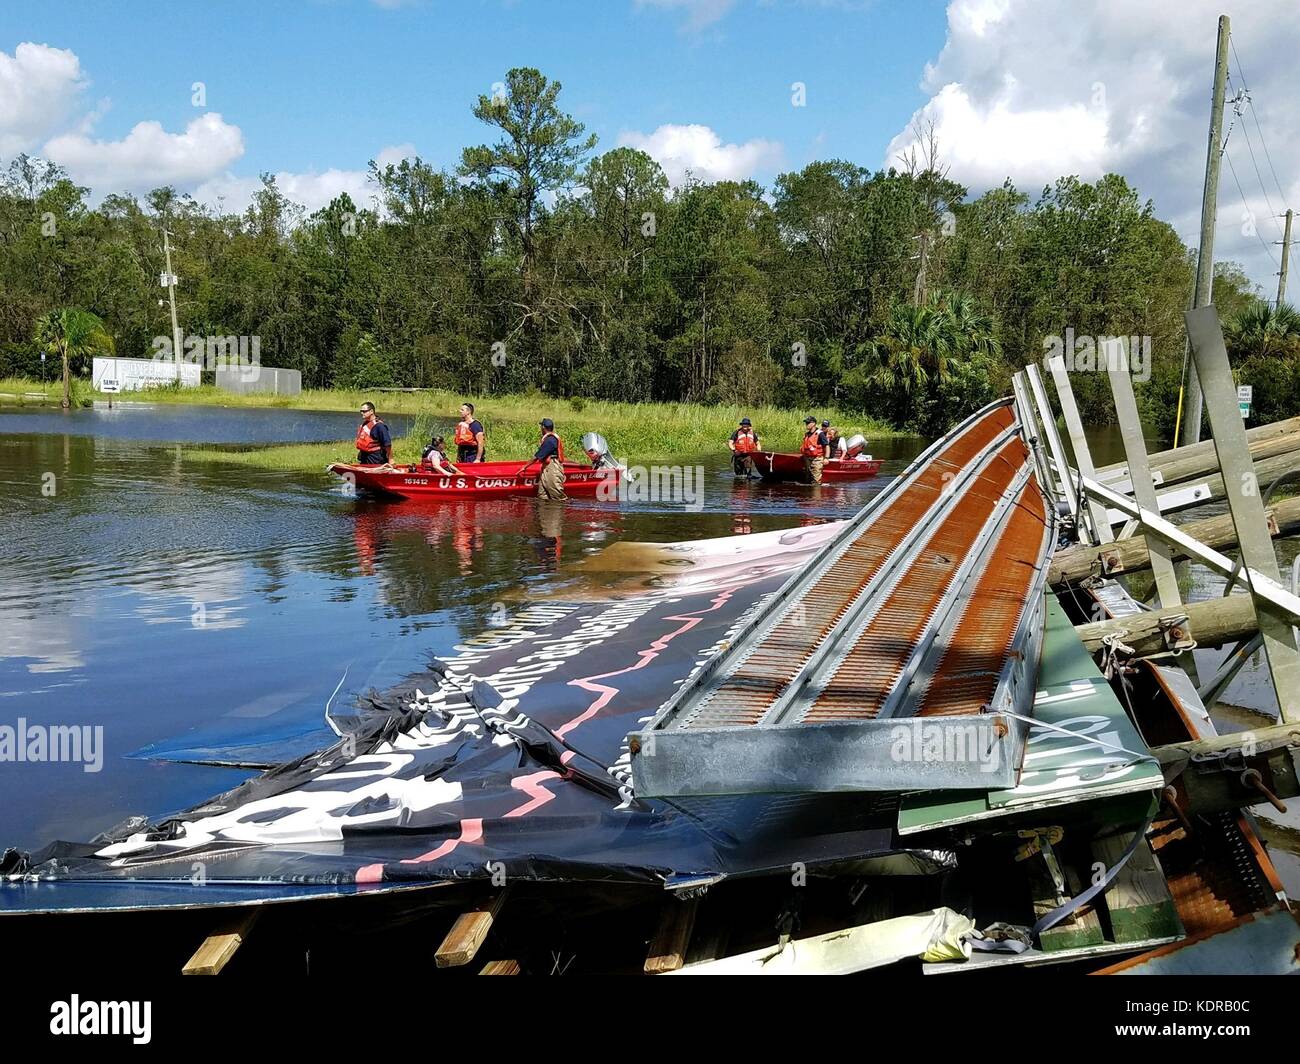 U.S. Coast Guard flood punt teams wade their boats through a flooded street during search and rescue efforts in the aftermath of Hurricane Irma September 12, 2017 in Hastings, Florida. Stock Photo